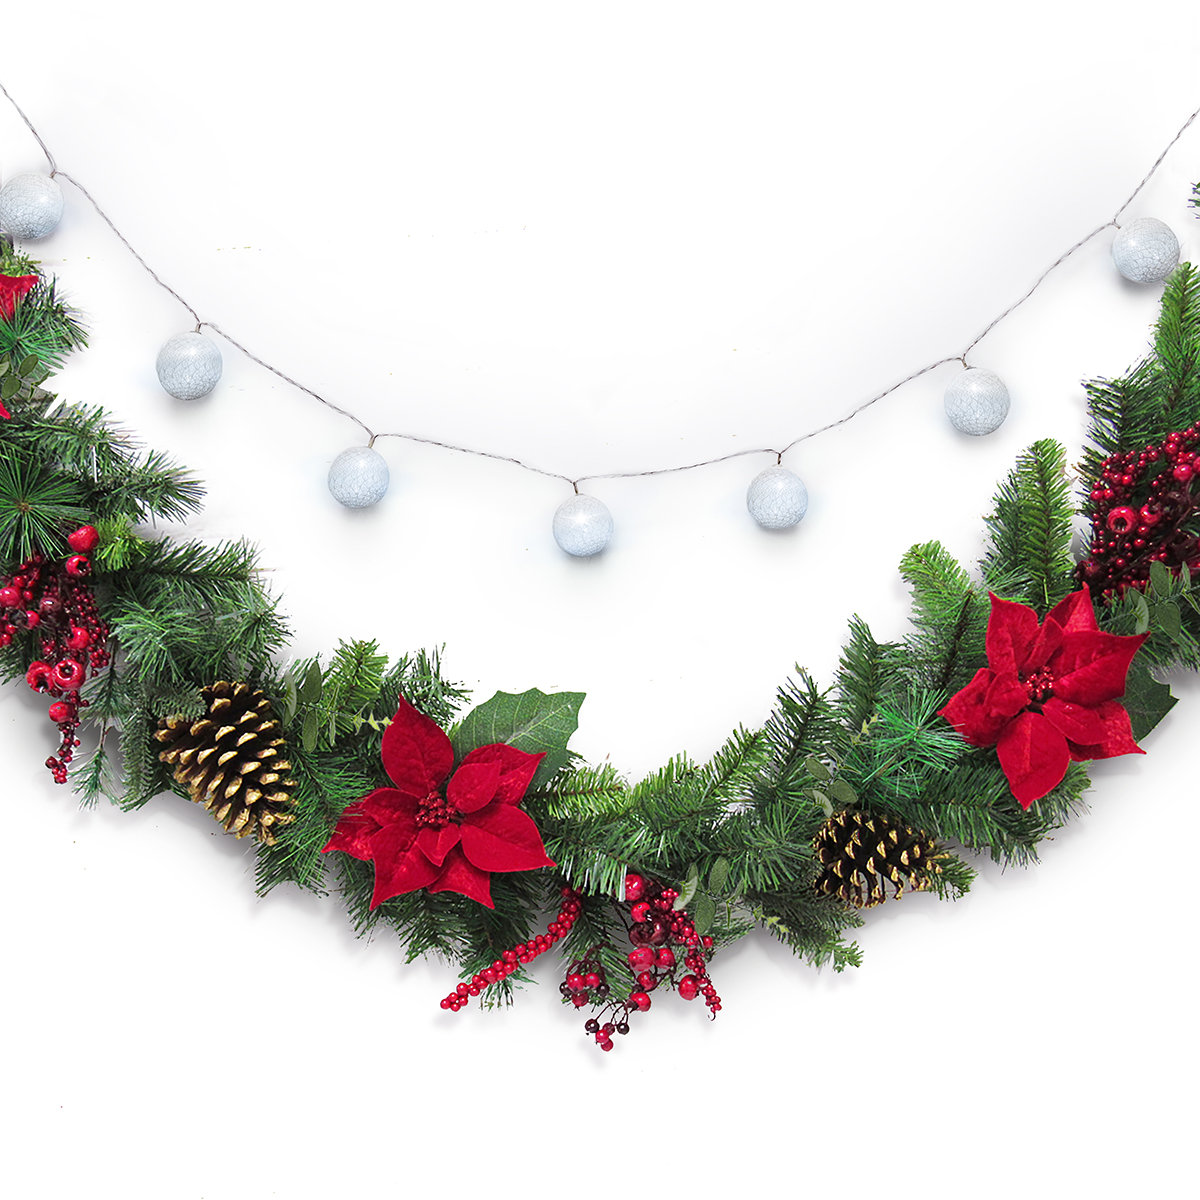 72'' in. Lighted Faux Garland